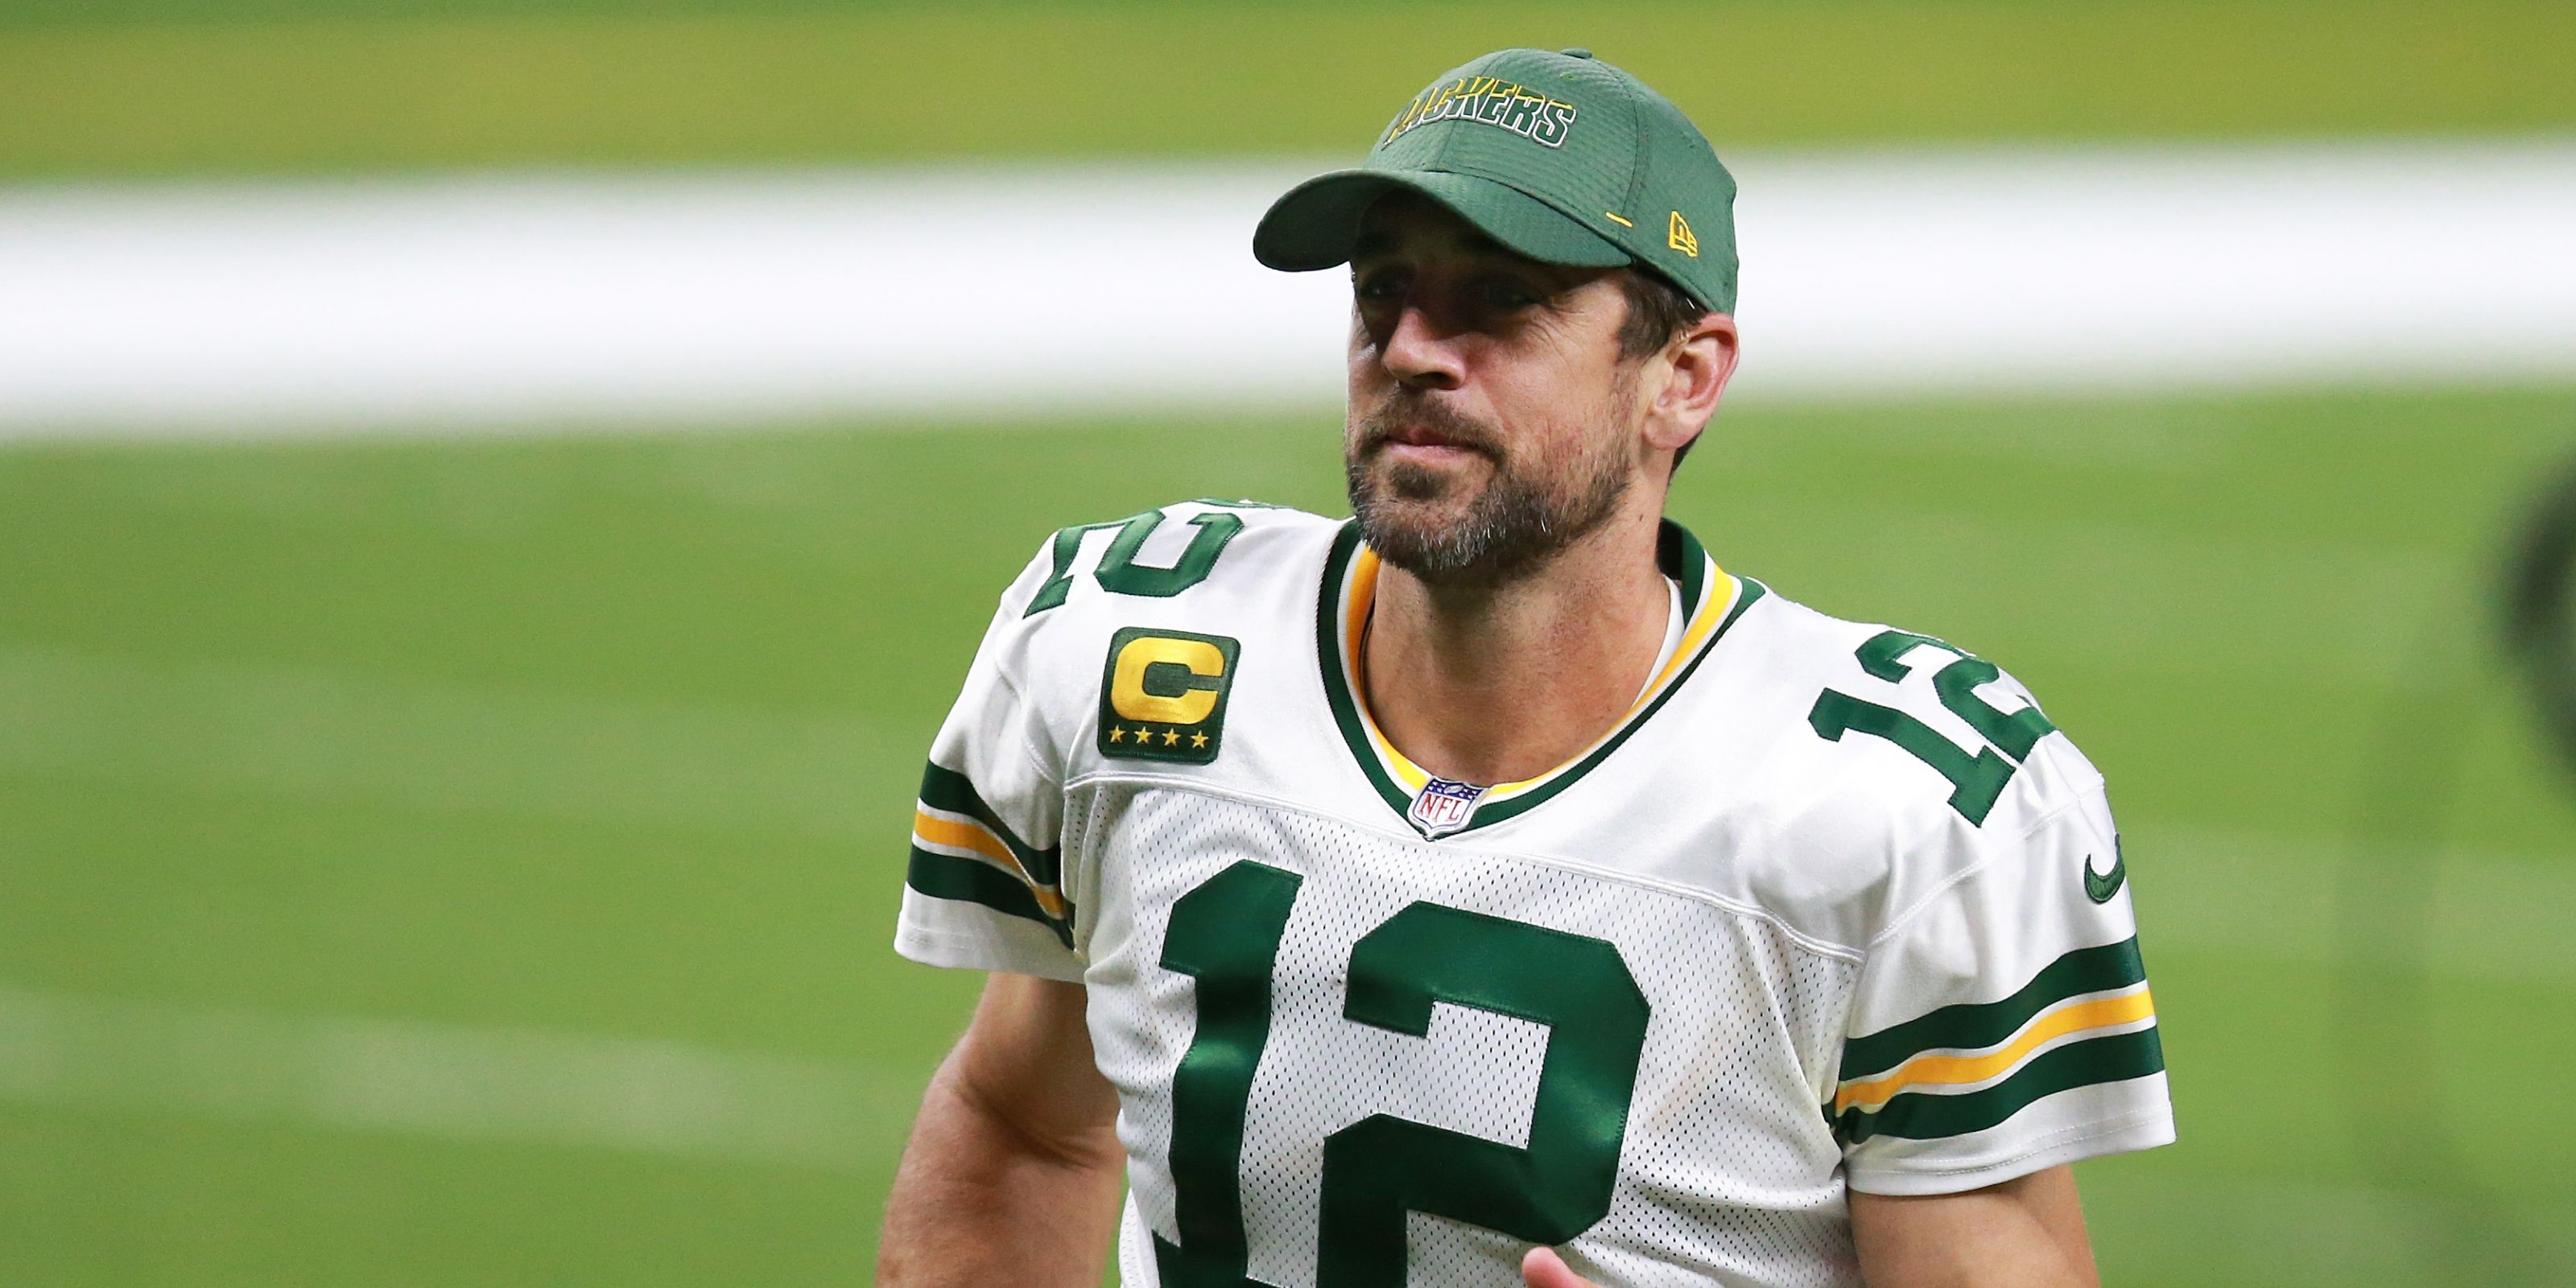 Aaron Rodgers of the Packers